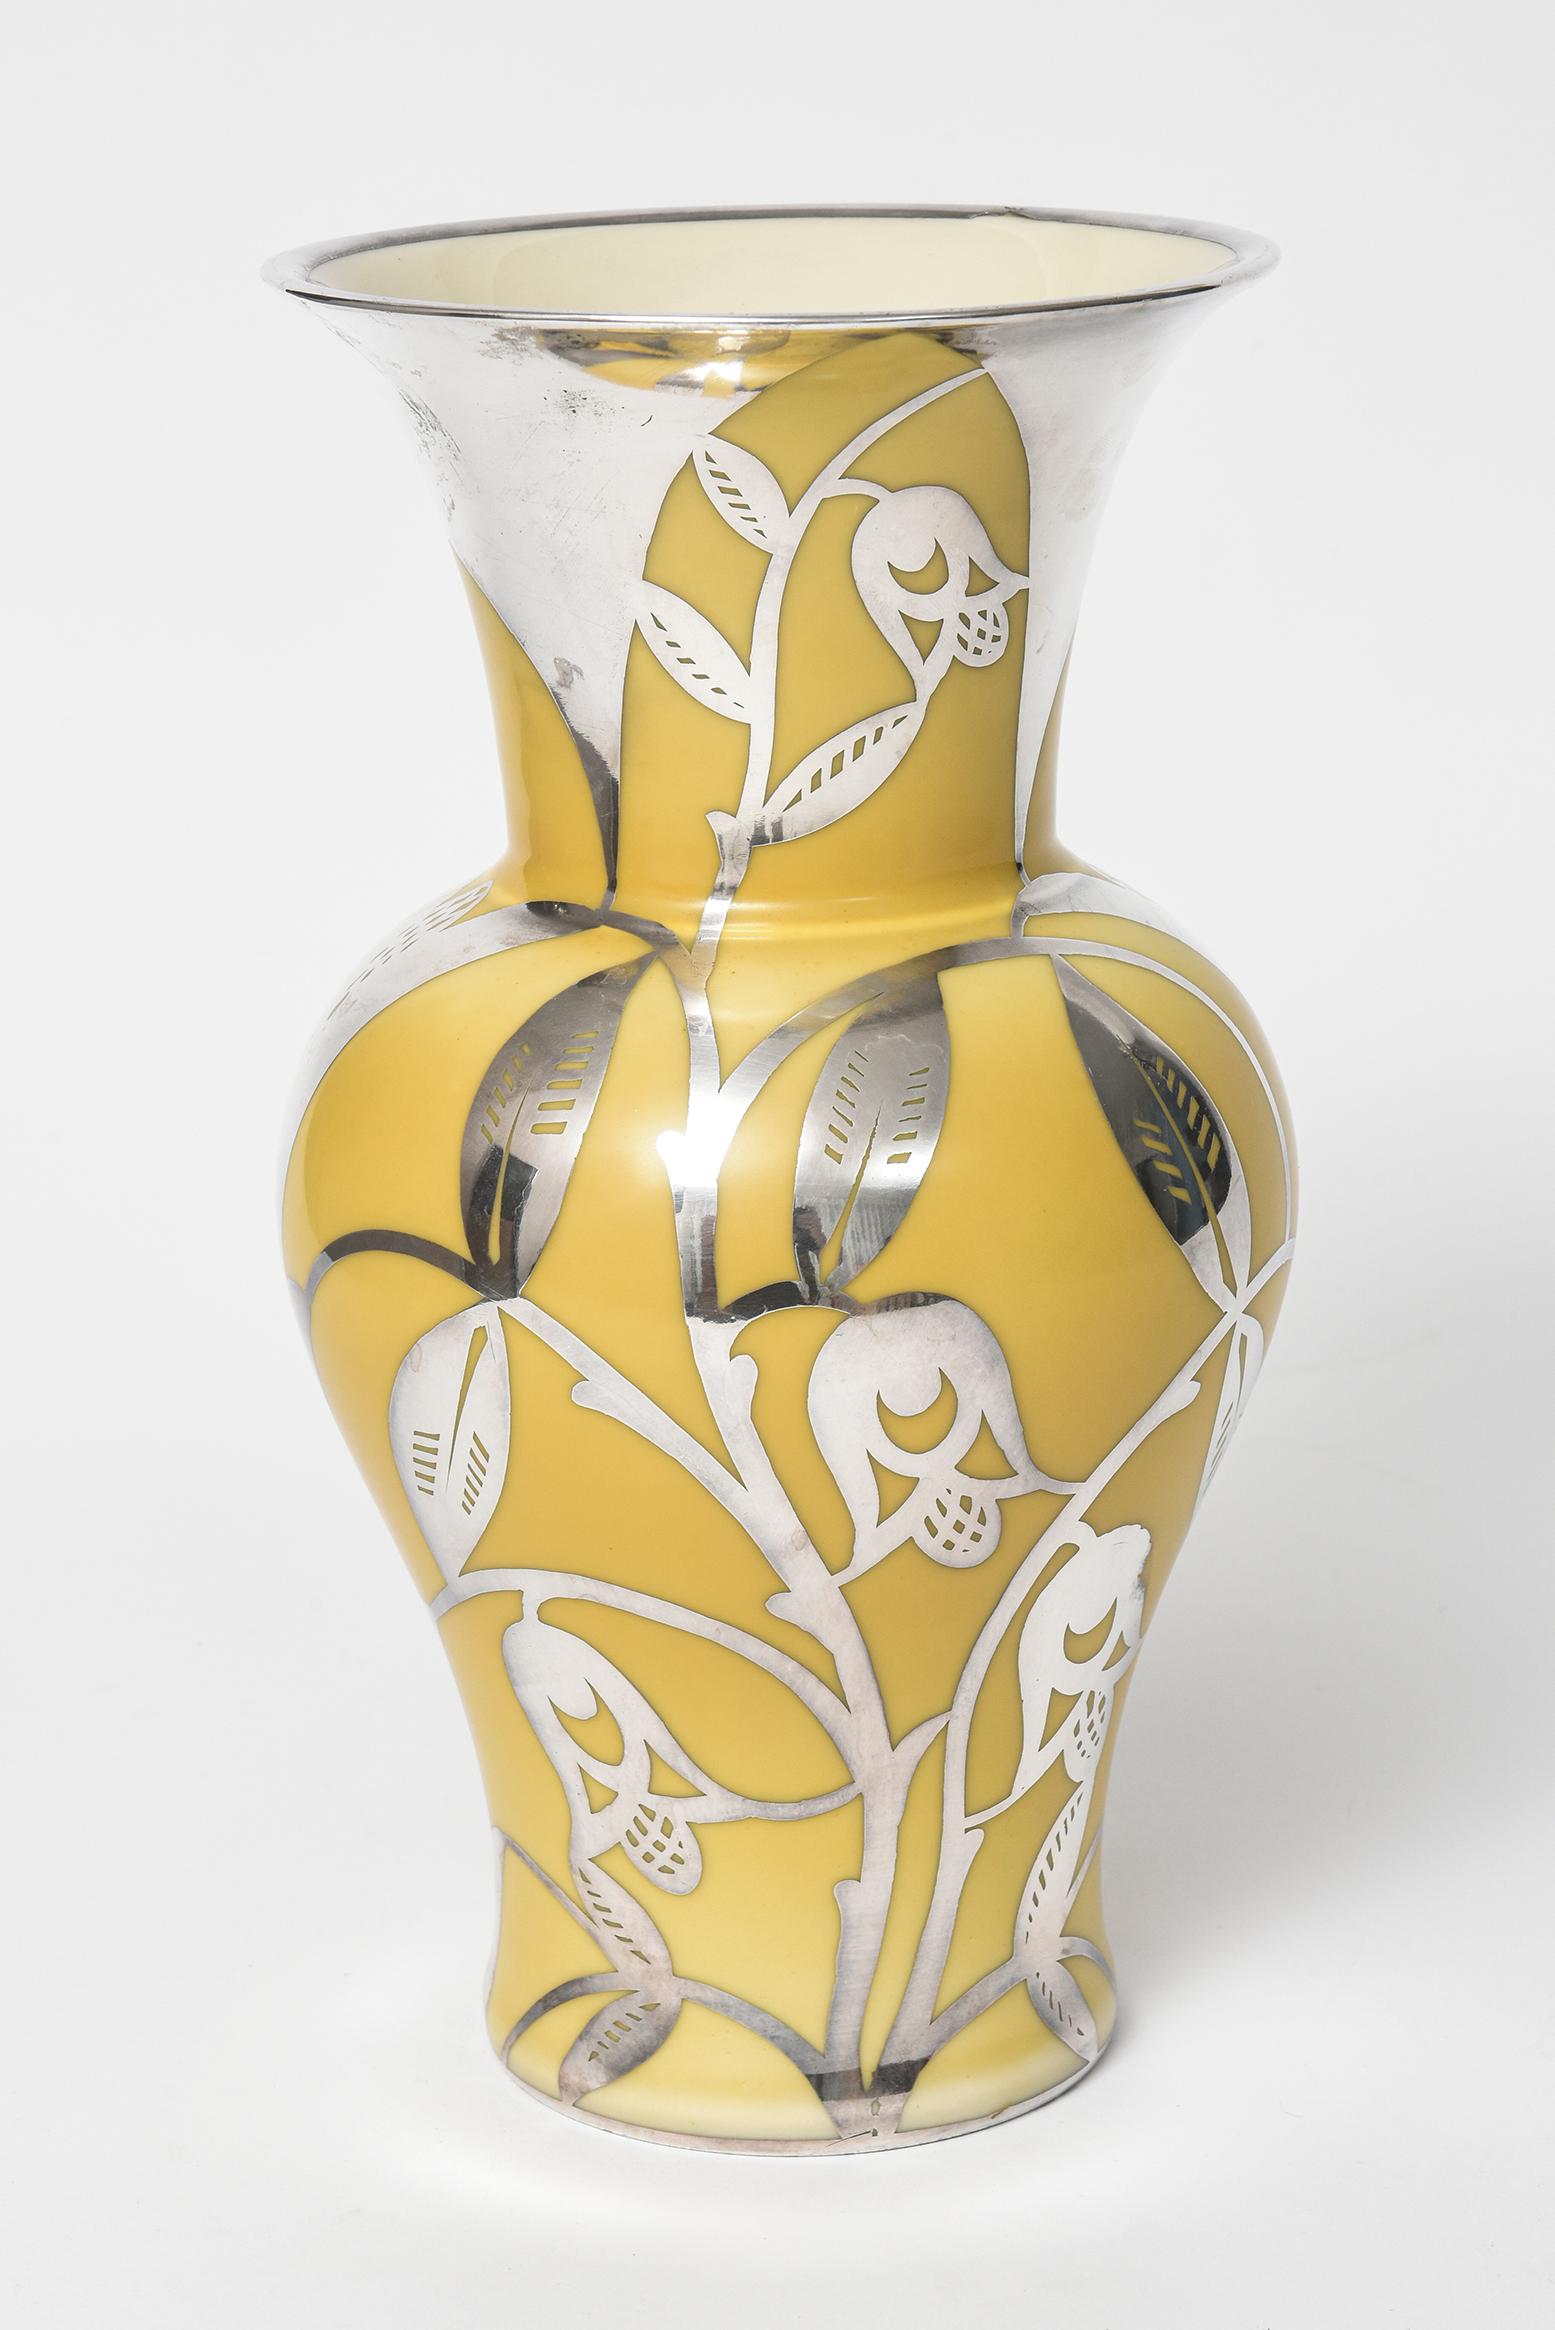 Mid 20th century sterling silver overlay featuring flowers, vines and leaves on a yellow porcelain vase. The vase was produced by Thomas Bavaria in the Germany US Zone (1945-1949)

Marked: Thomas Ivory Thomas Bavaria Sheild produced in Germany US